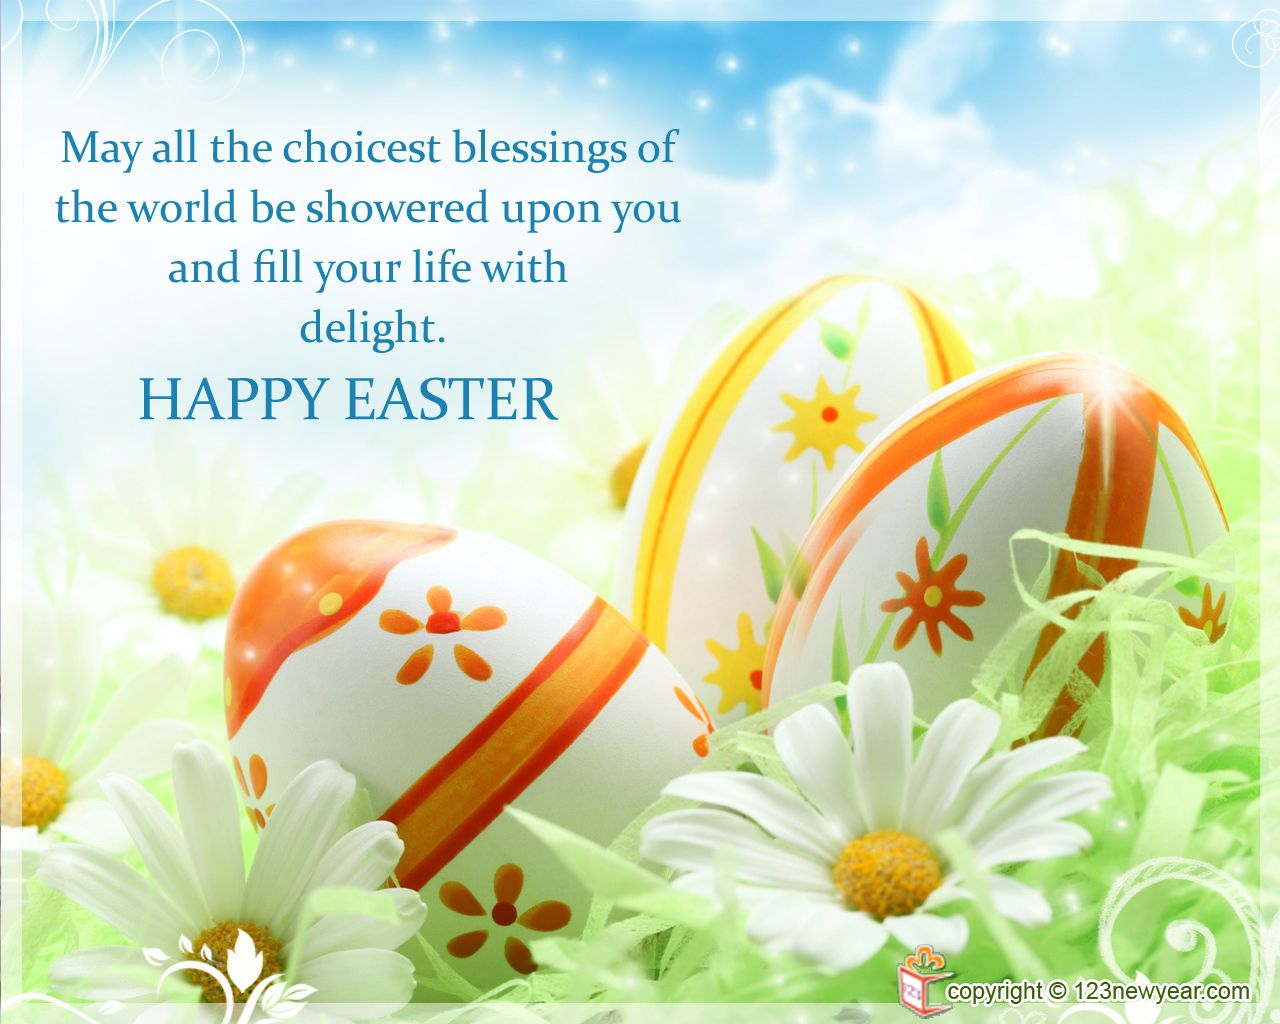 Happy Easter Quotes 2020: Inspirational Easter Quotes And Sayings